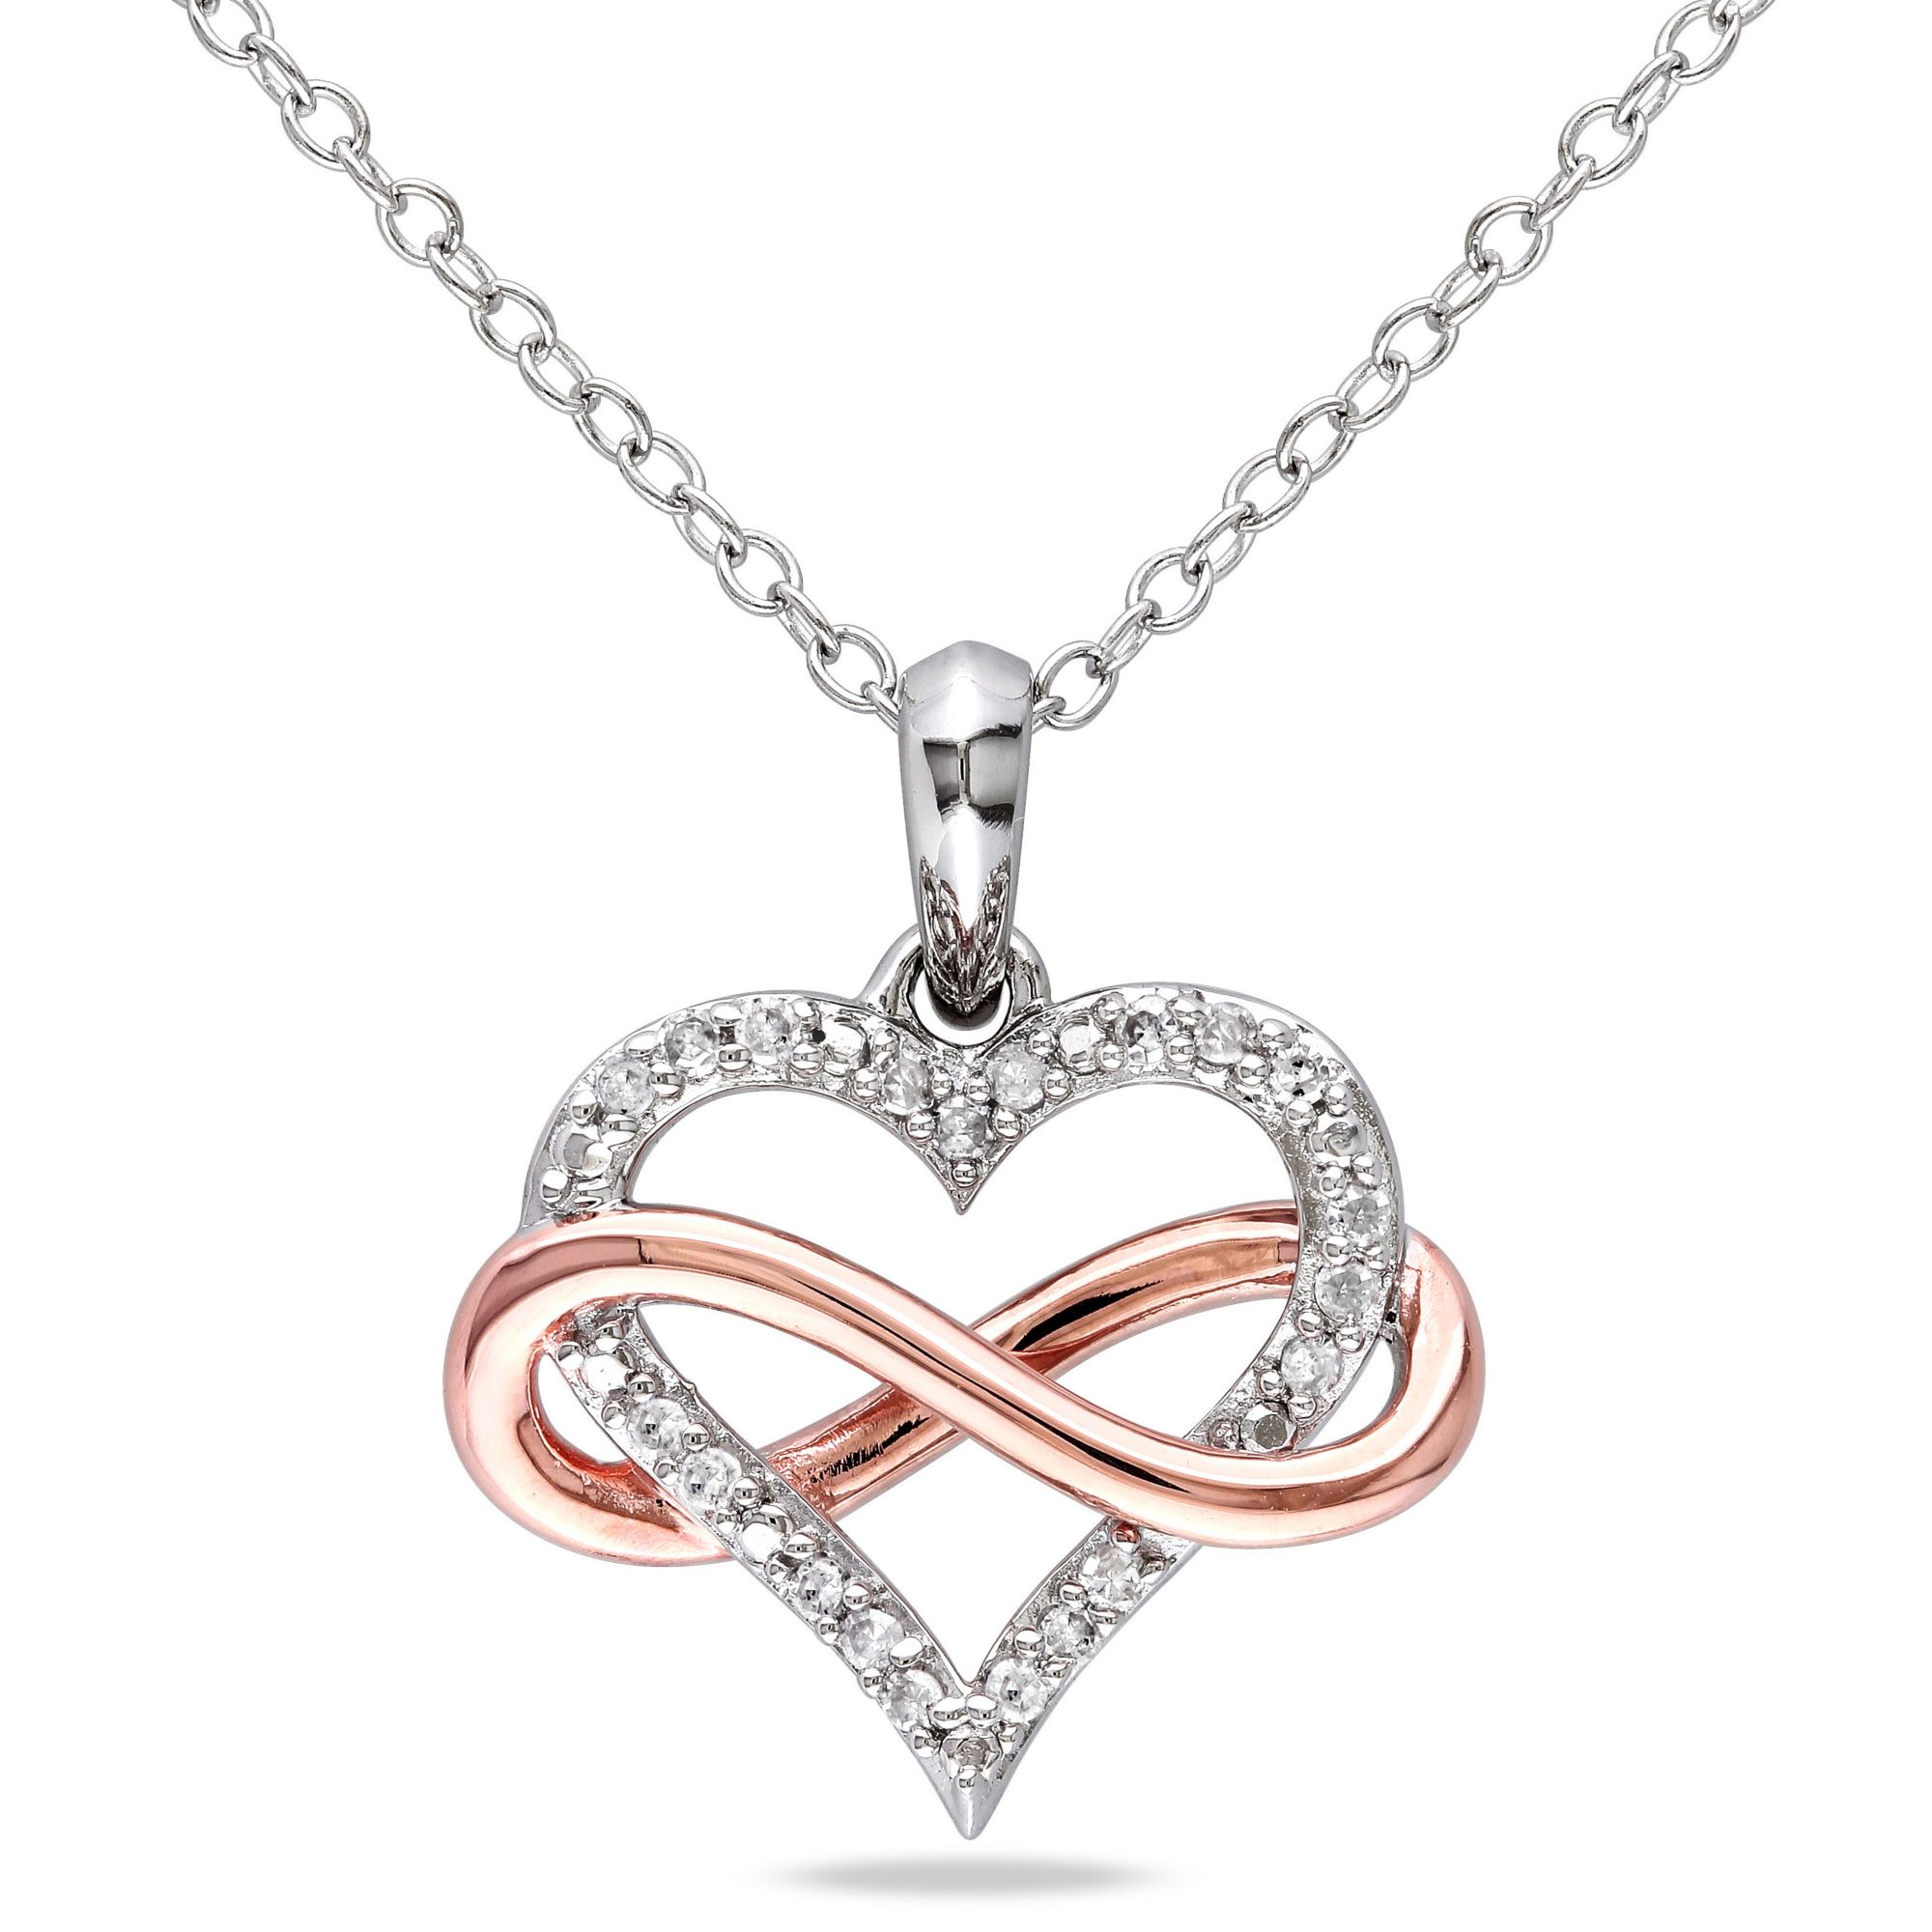 Romantic Pink Heart High Carbon Diamond S925 Silver Jewelry Set Pendant  Necklace Earrings For Women Luxury Valentine's Day Gift